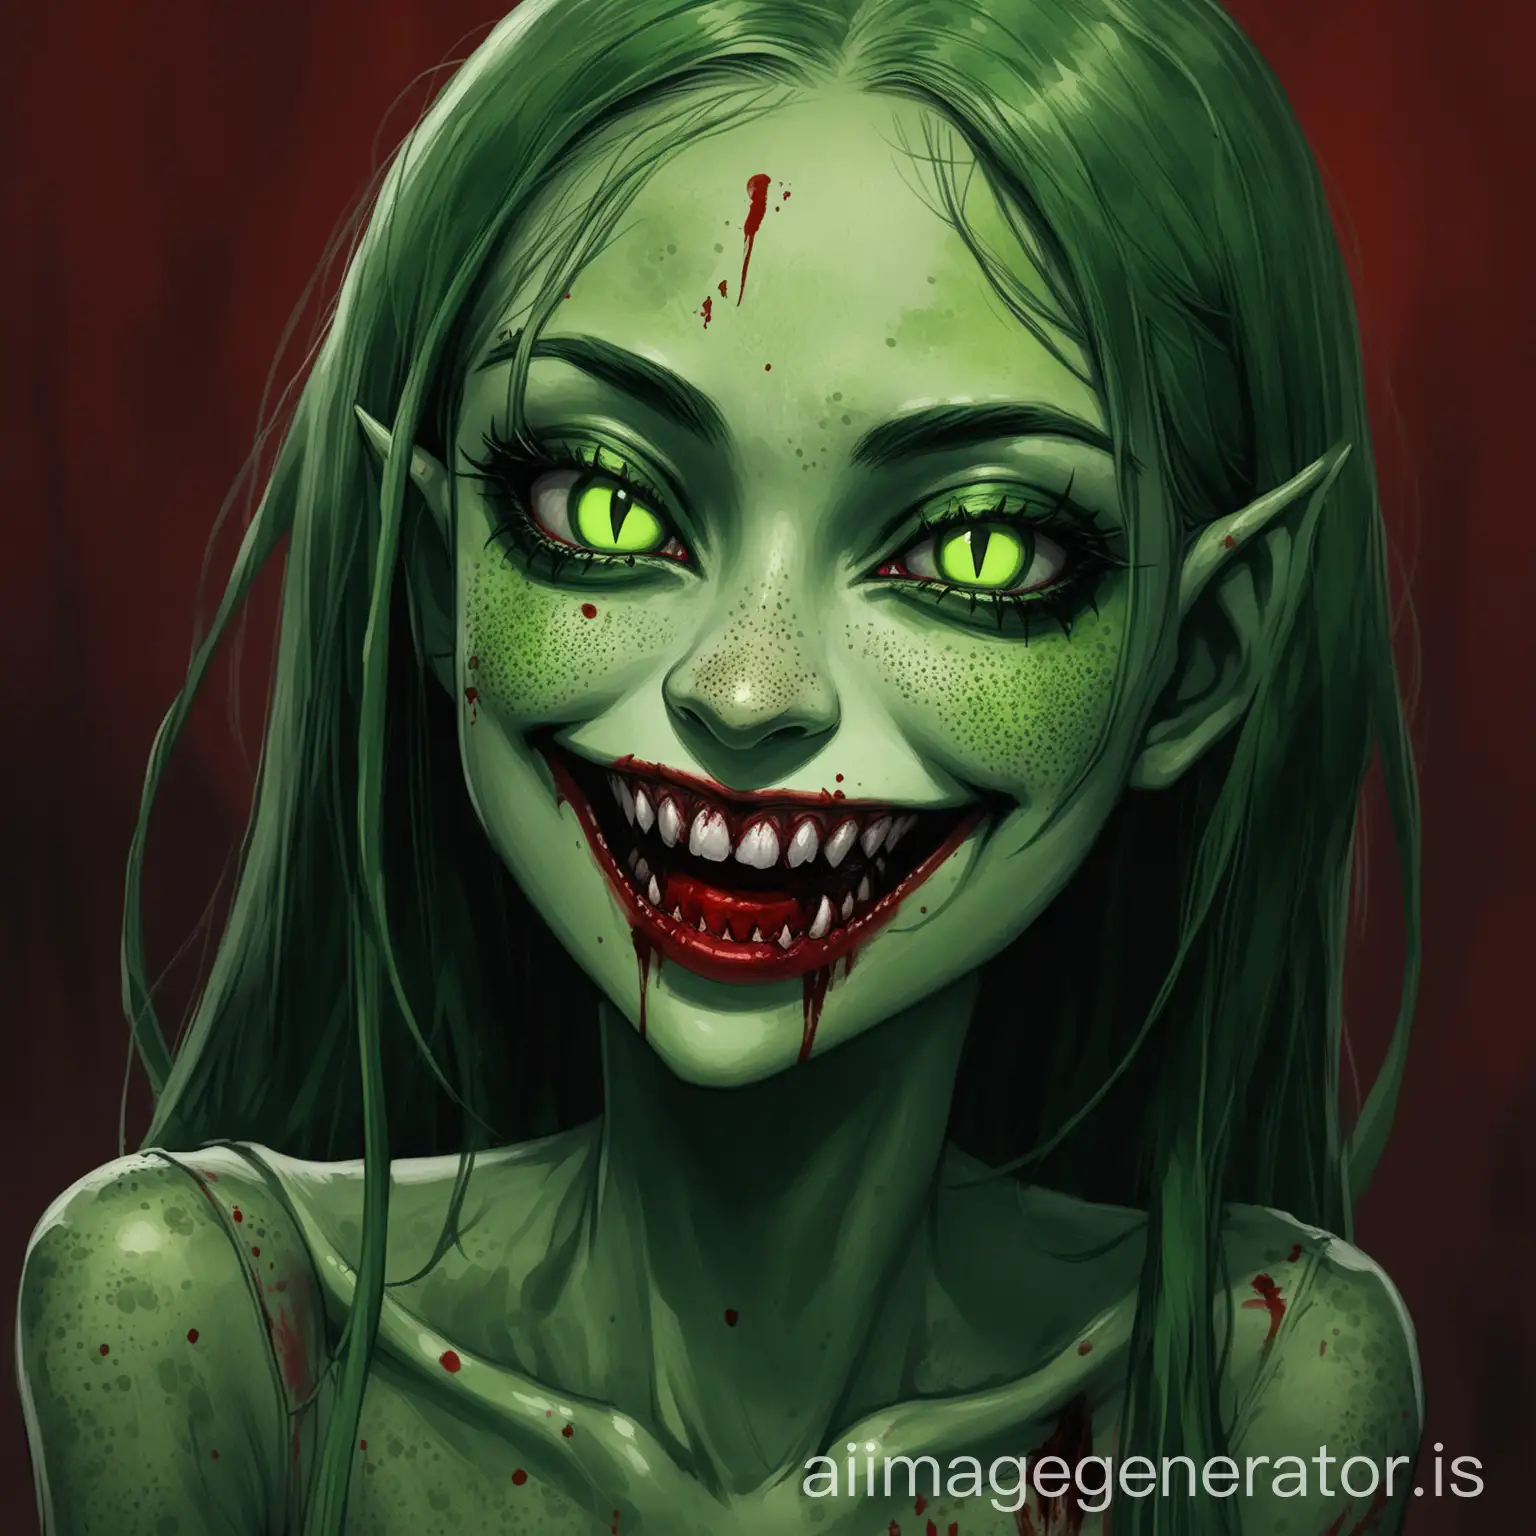 a green skinned, skinny girl that has green skin, long vampire fangs, green freckles, blood on her lips, and who is smiling very wide